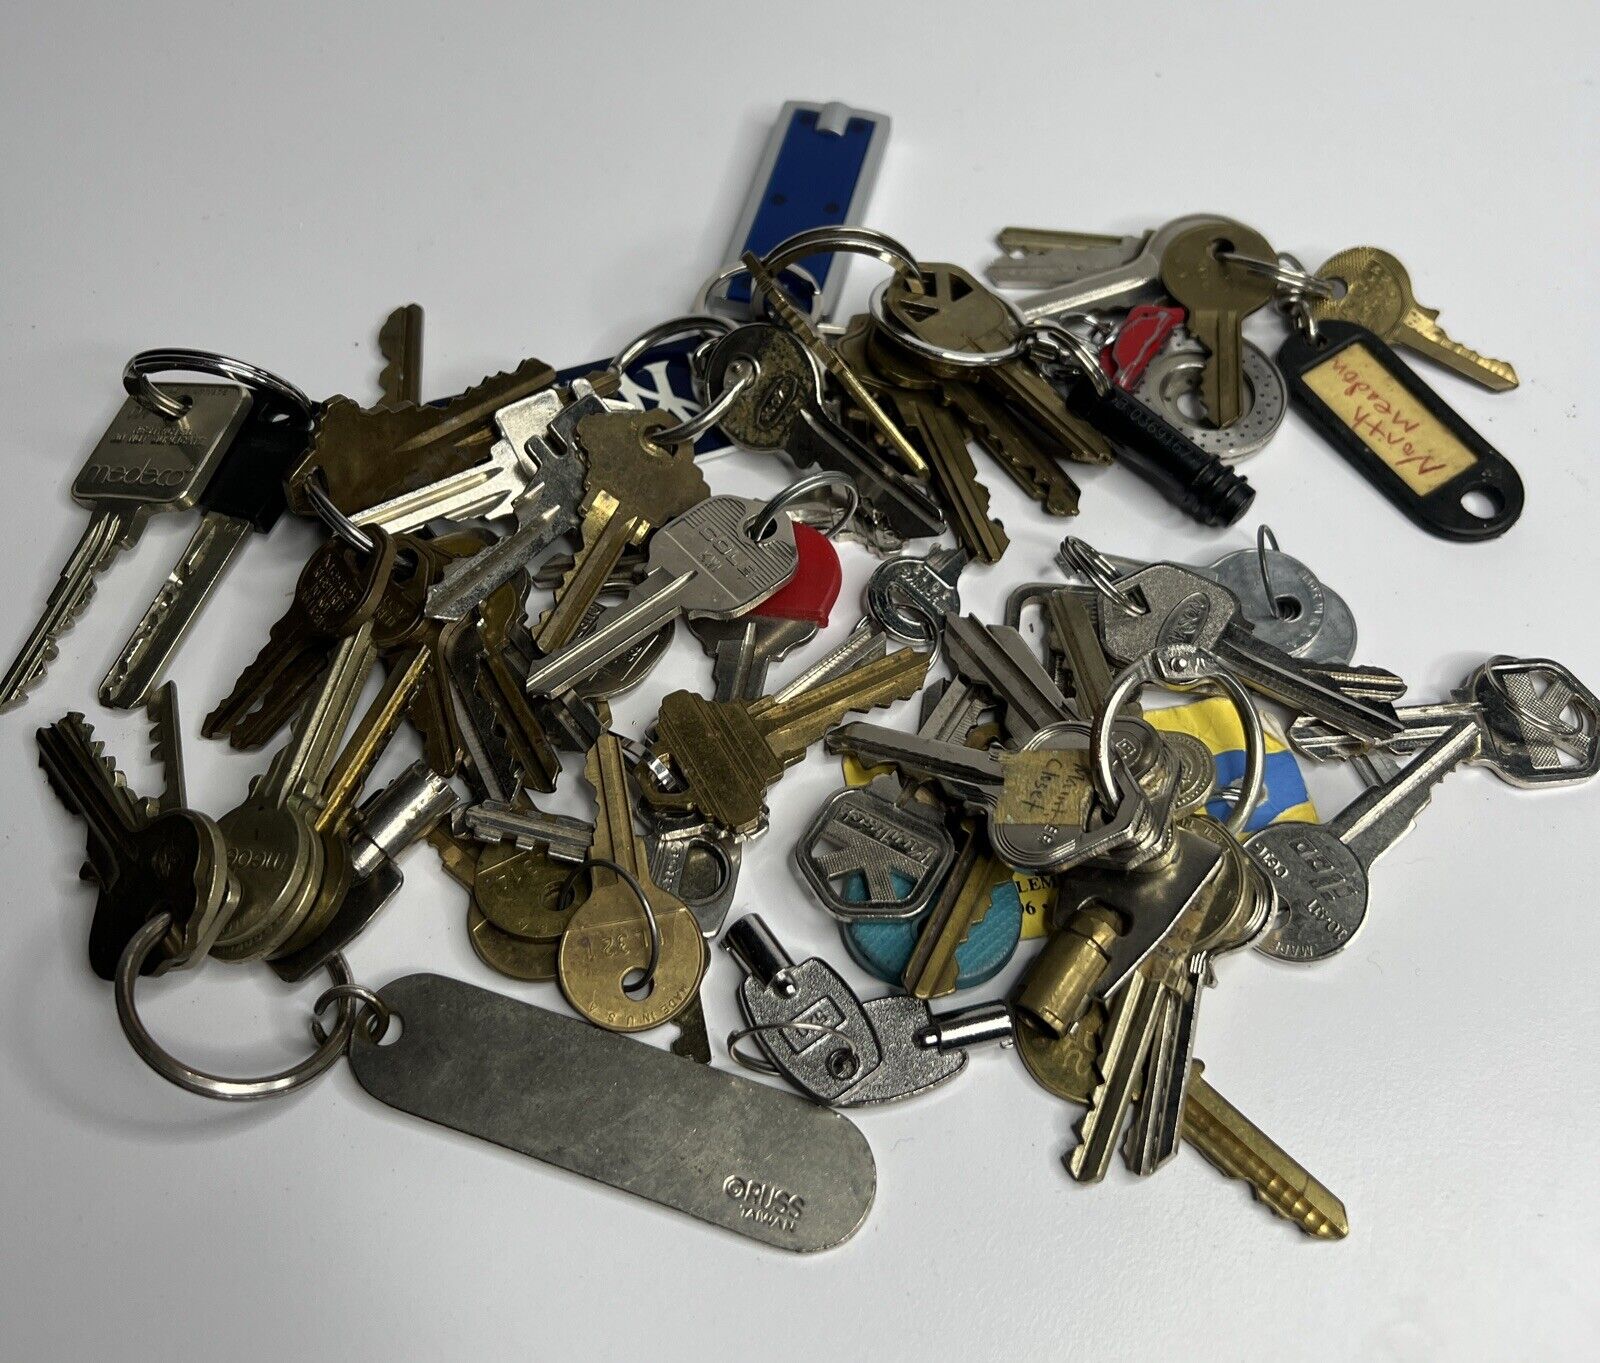 1.5 Pounds Used Lot of Old Keys Different Cuts Assortment Of Keys -Crafts